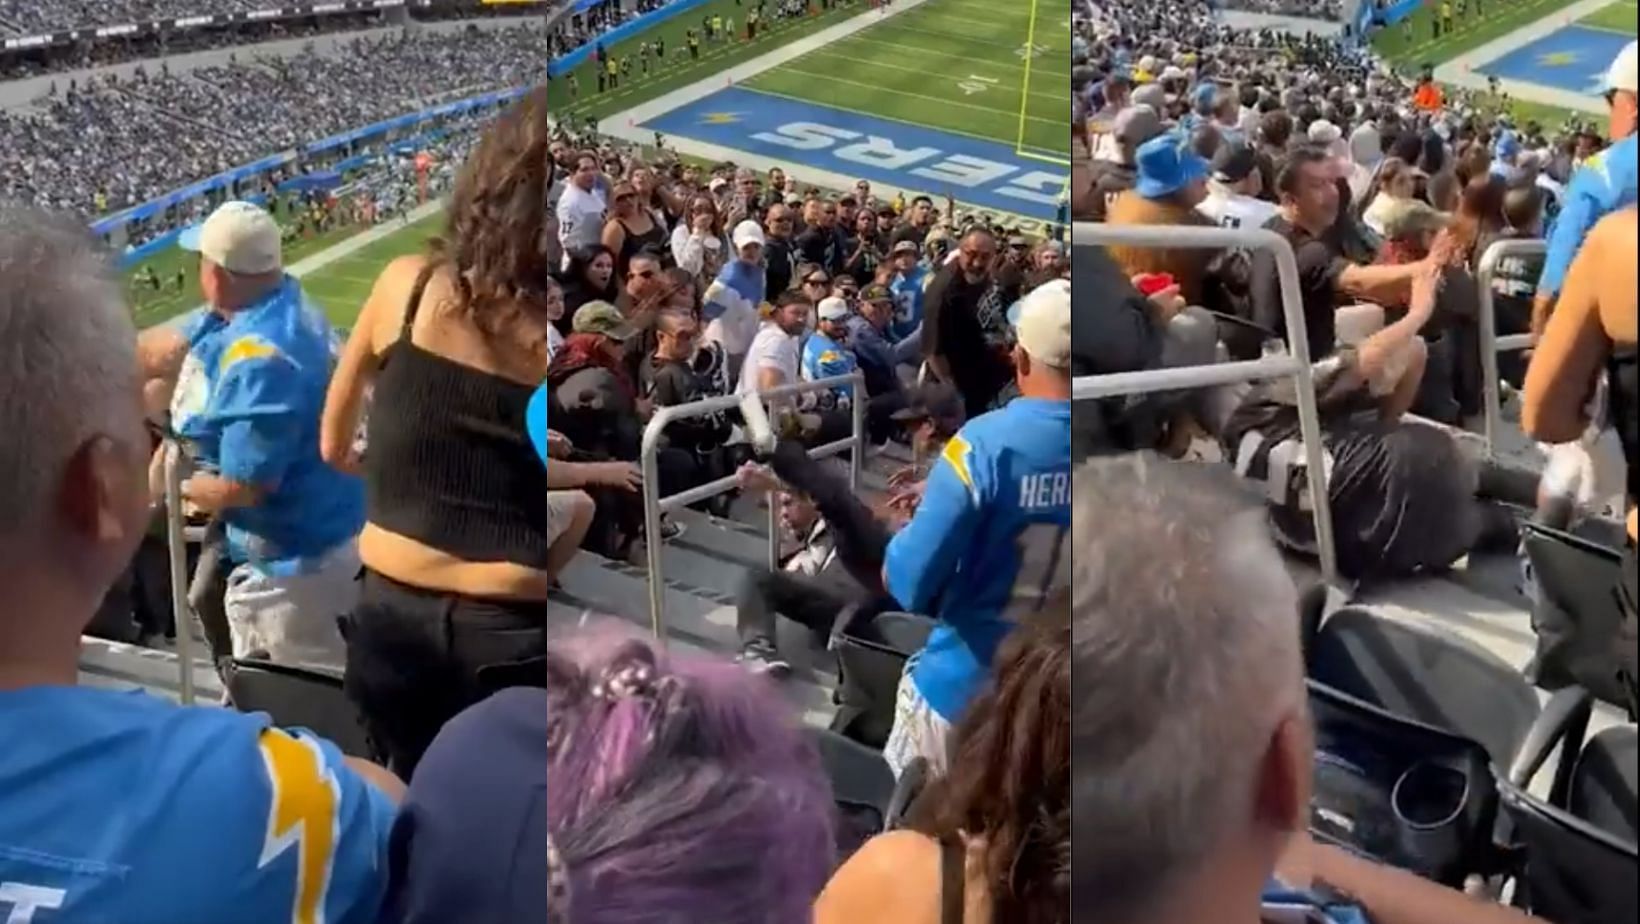 A fight broke out between Chargers and Raiders fans